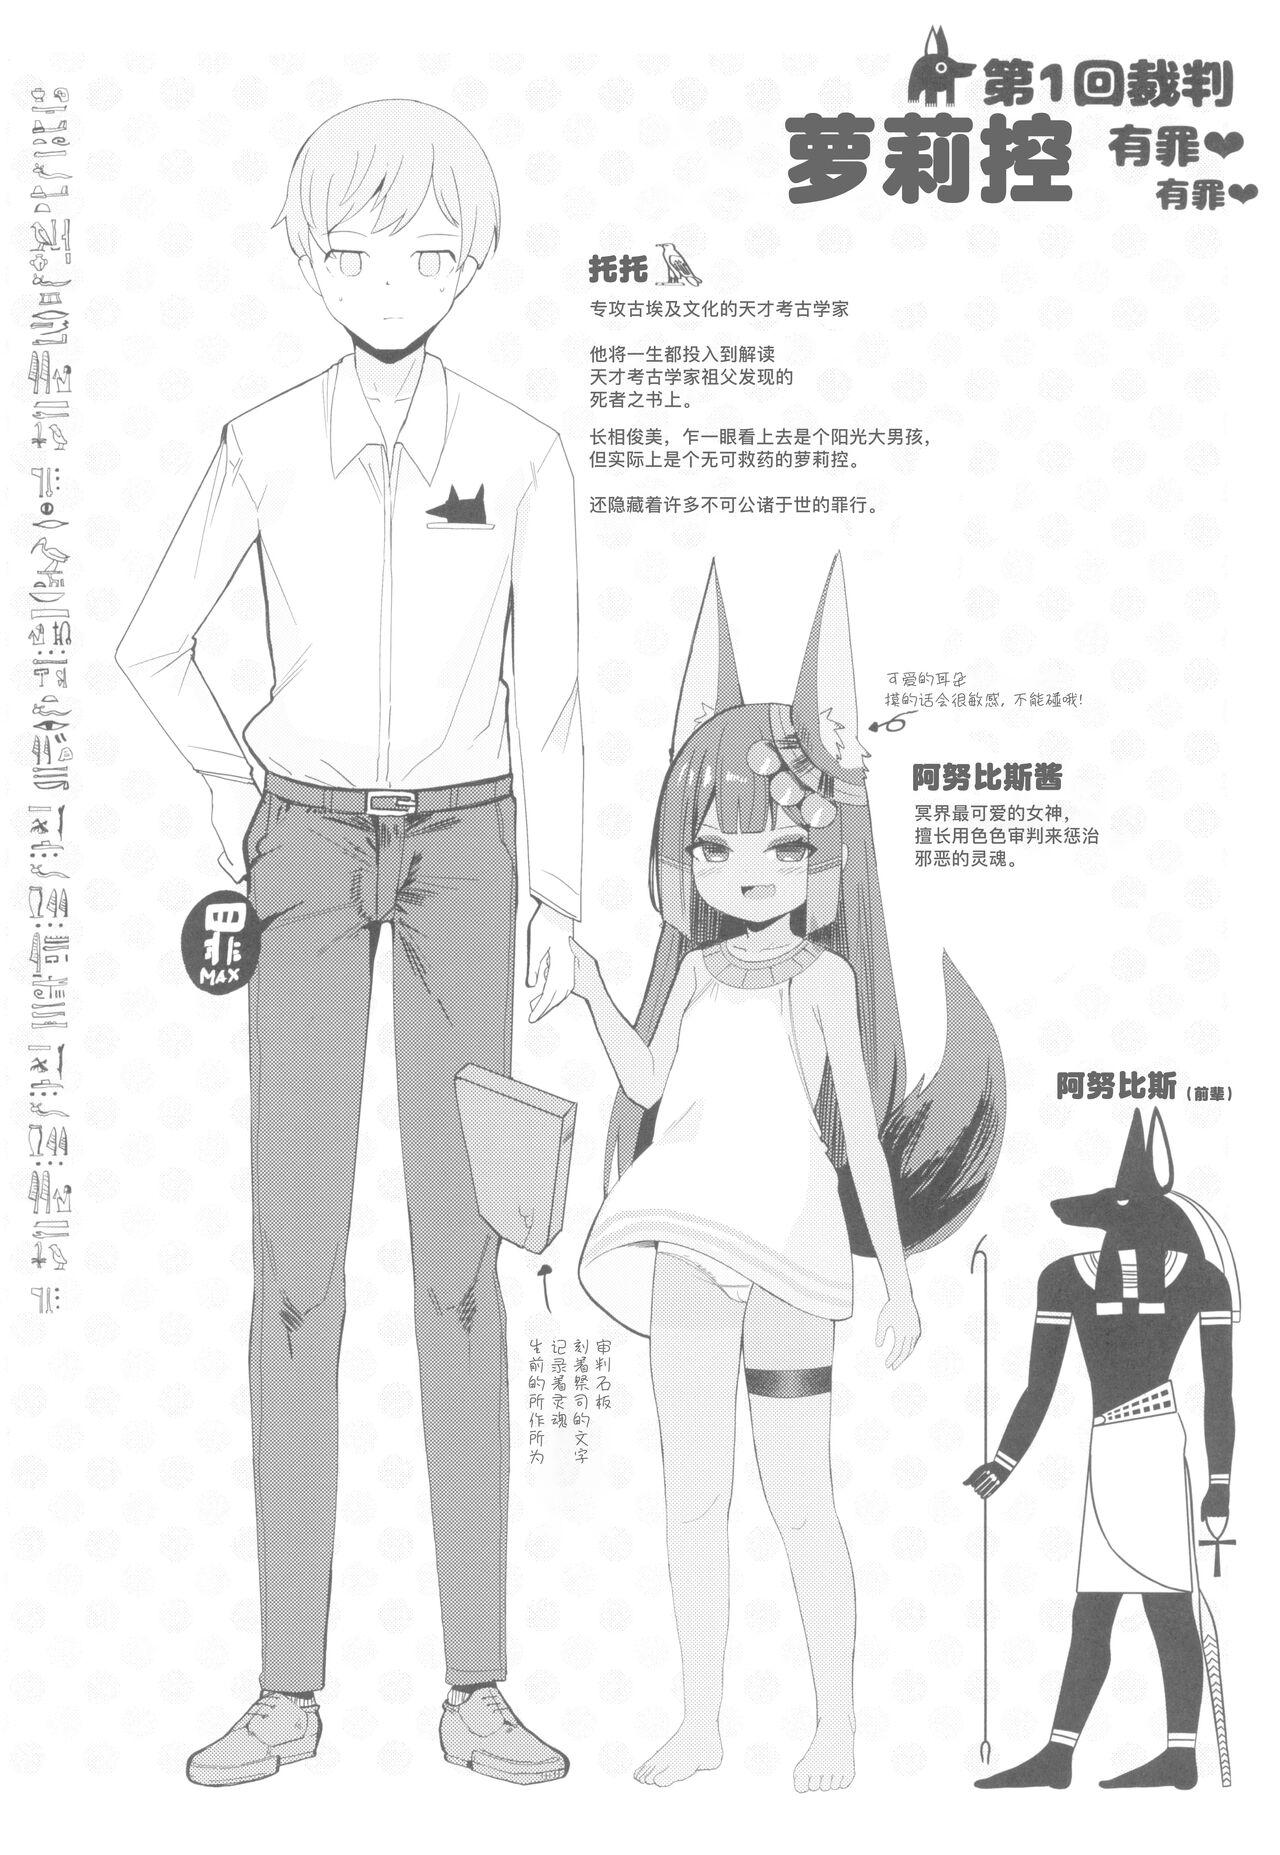 Anubis no Ero Shisha Shinpan - She is the oldest FBI in human history and will find souls who have erotic thoughts about loli | 阿努比斯的色色死者审判 3